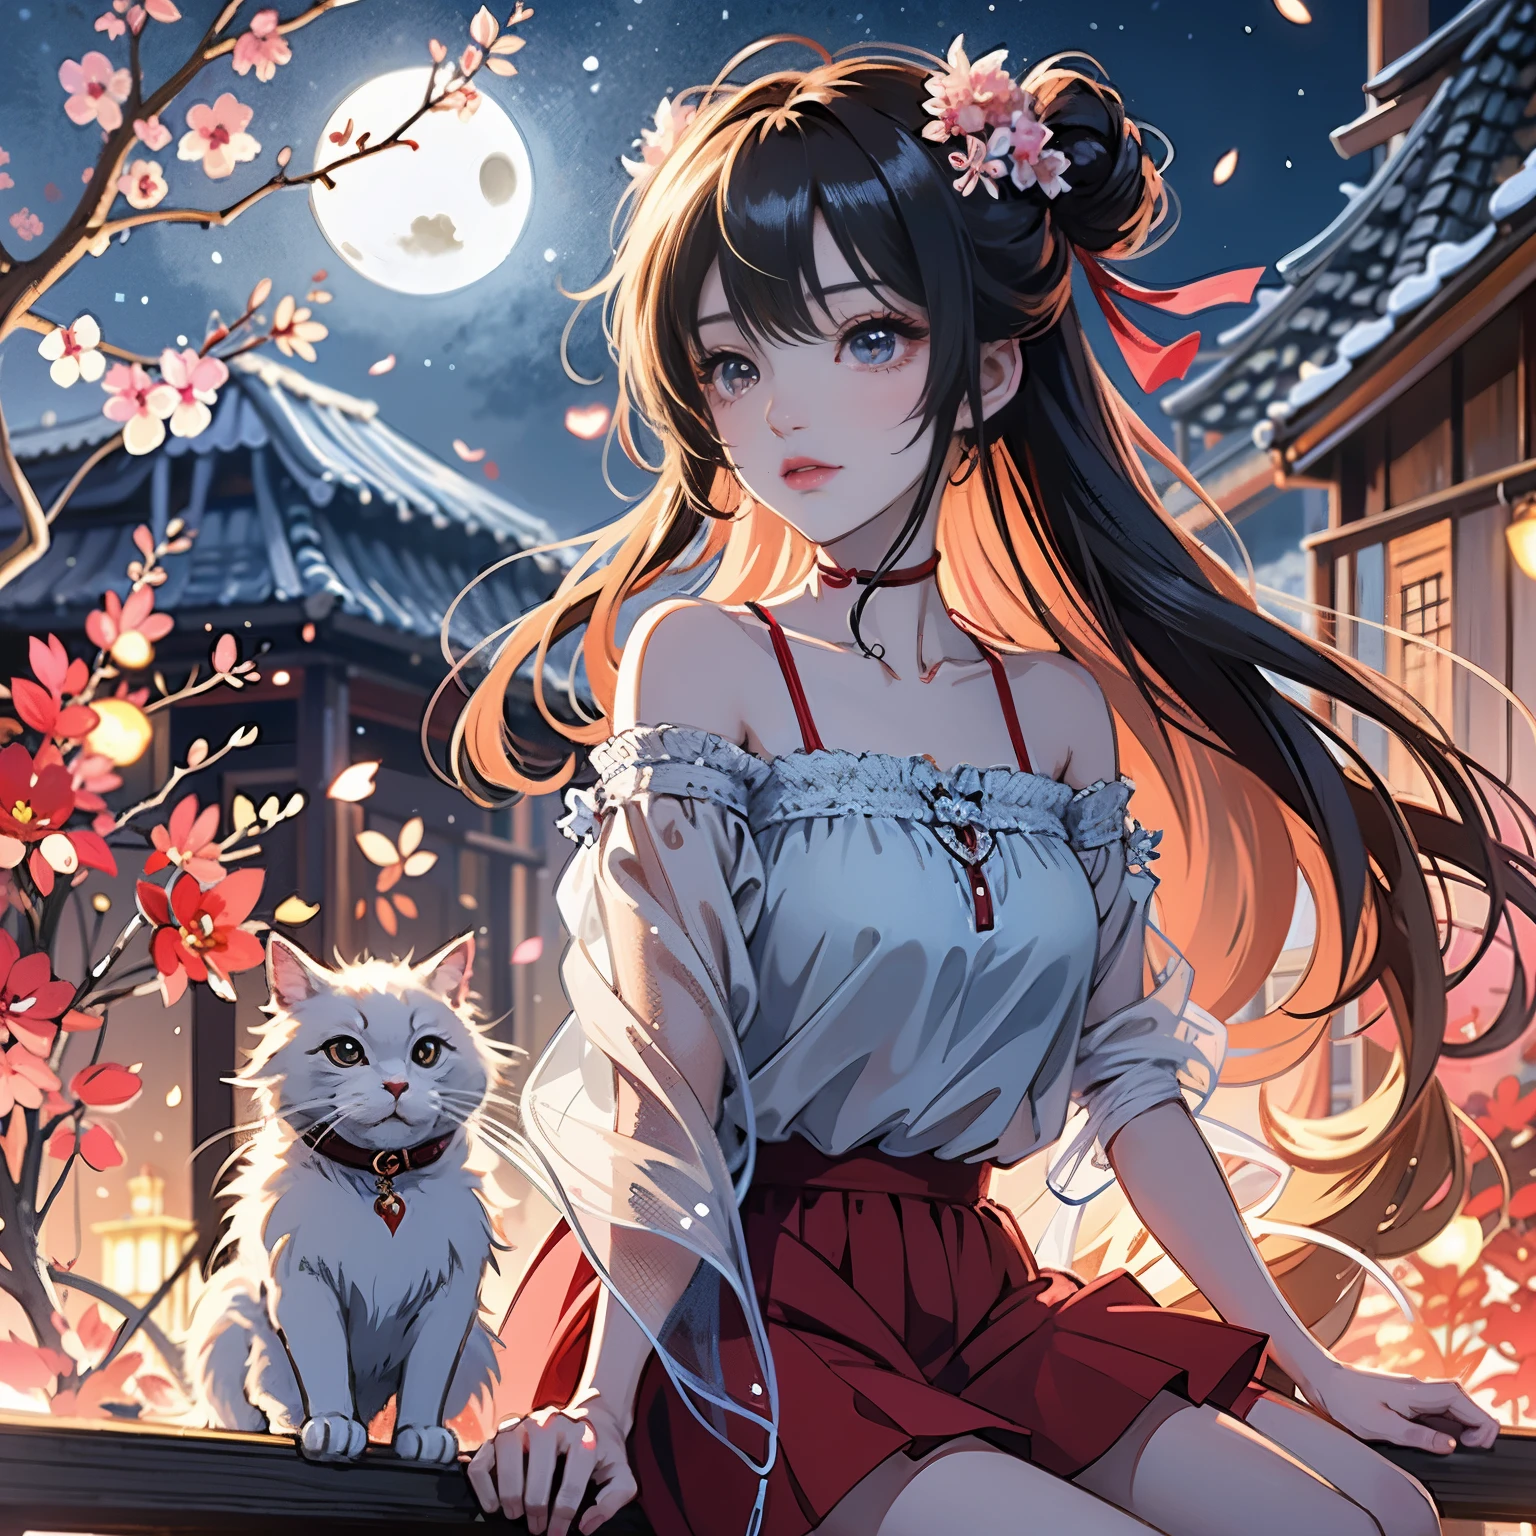 Long hair anime girl sitting on the fence with a cat, anime style 4k, beautiful Anime catsgirl, very beautiful Anime cats girl, Beautiful anime, Beautiful anime girl, night nucleus, cat ears anime girl, anime pictures, anime wallpaper 4k, anime wallpaper 4k, 4k anime wallpaper, Anime cats, anime art wallpaper 4k